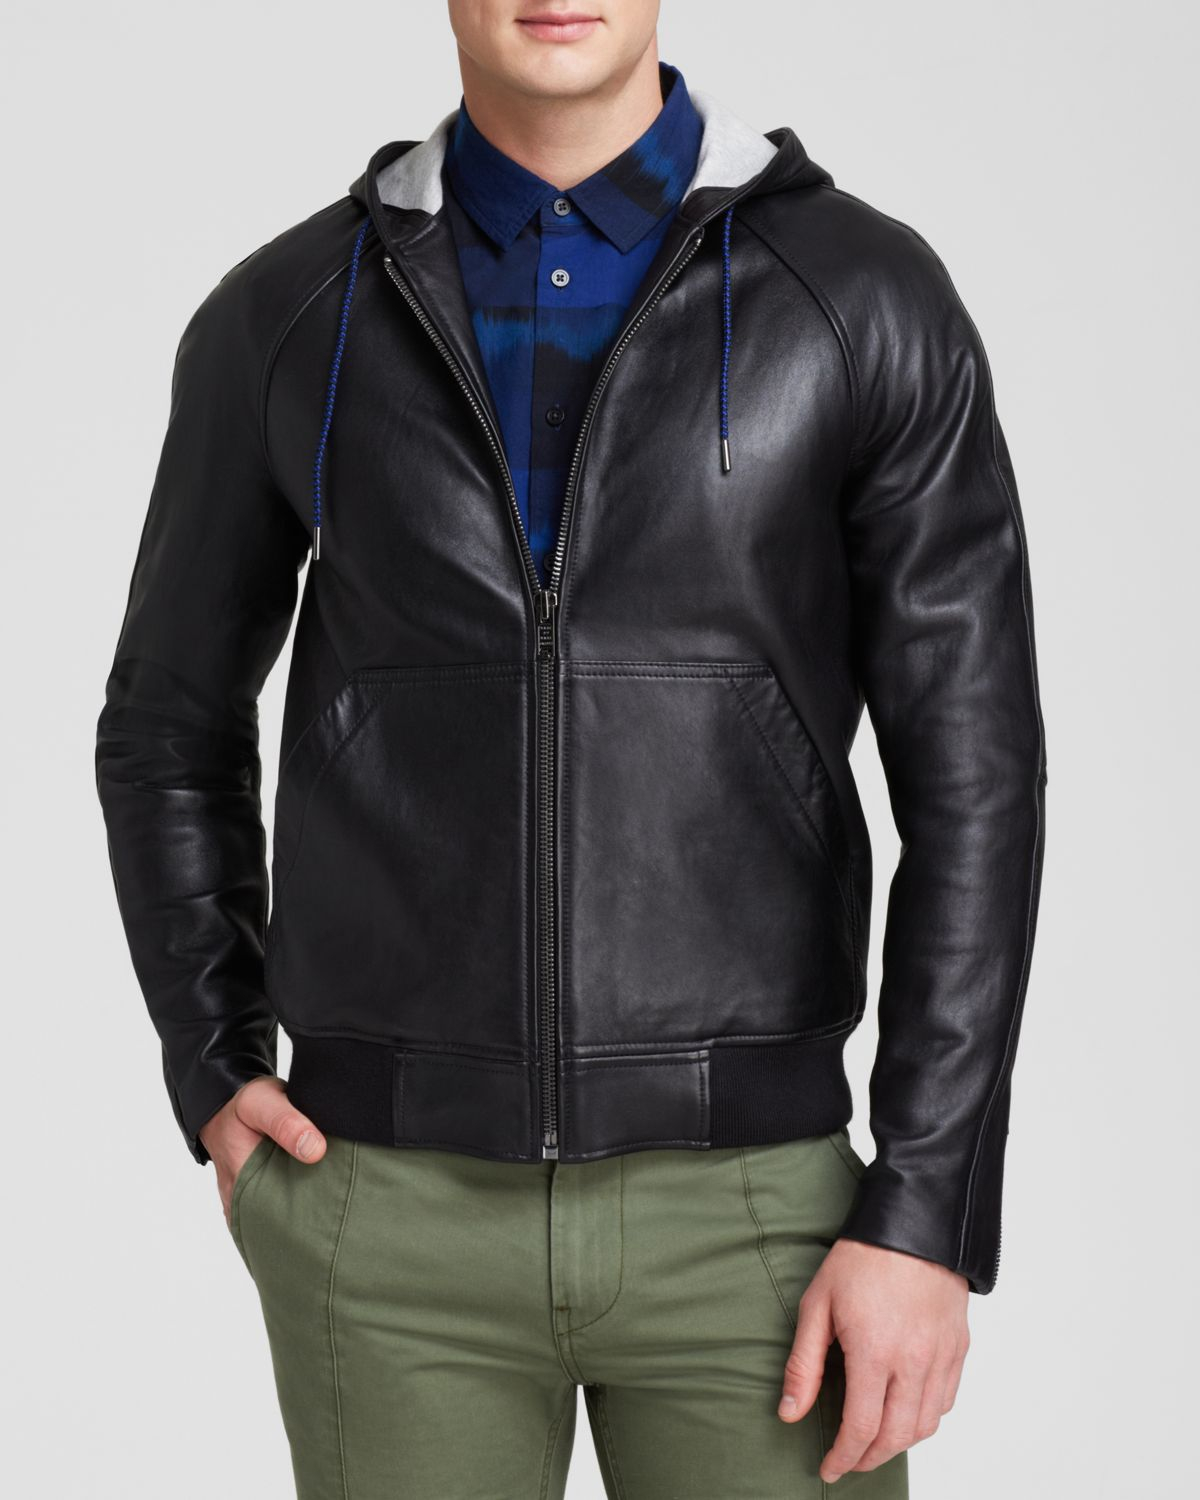 Marc By Marc Jacobs Hooded Leather Jacket in Black for Men - Lyst